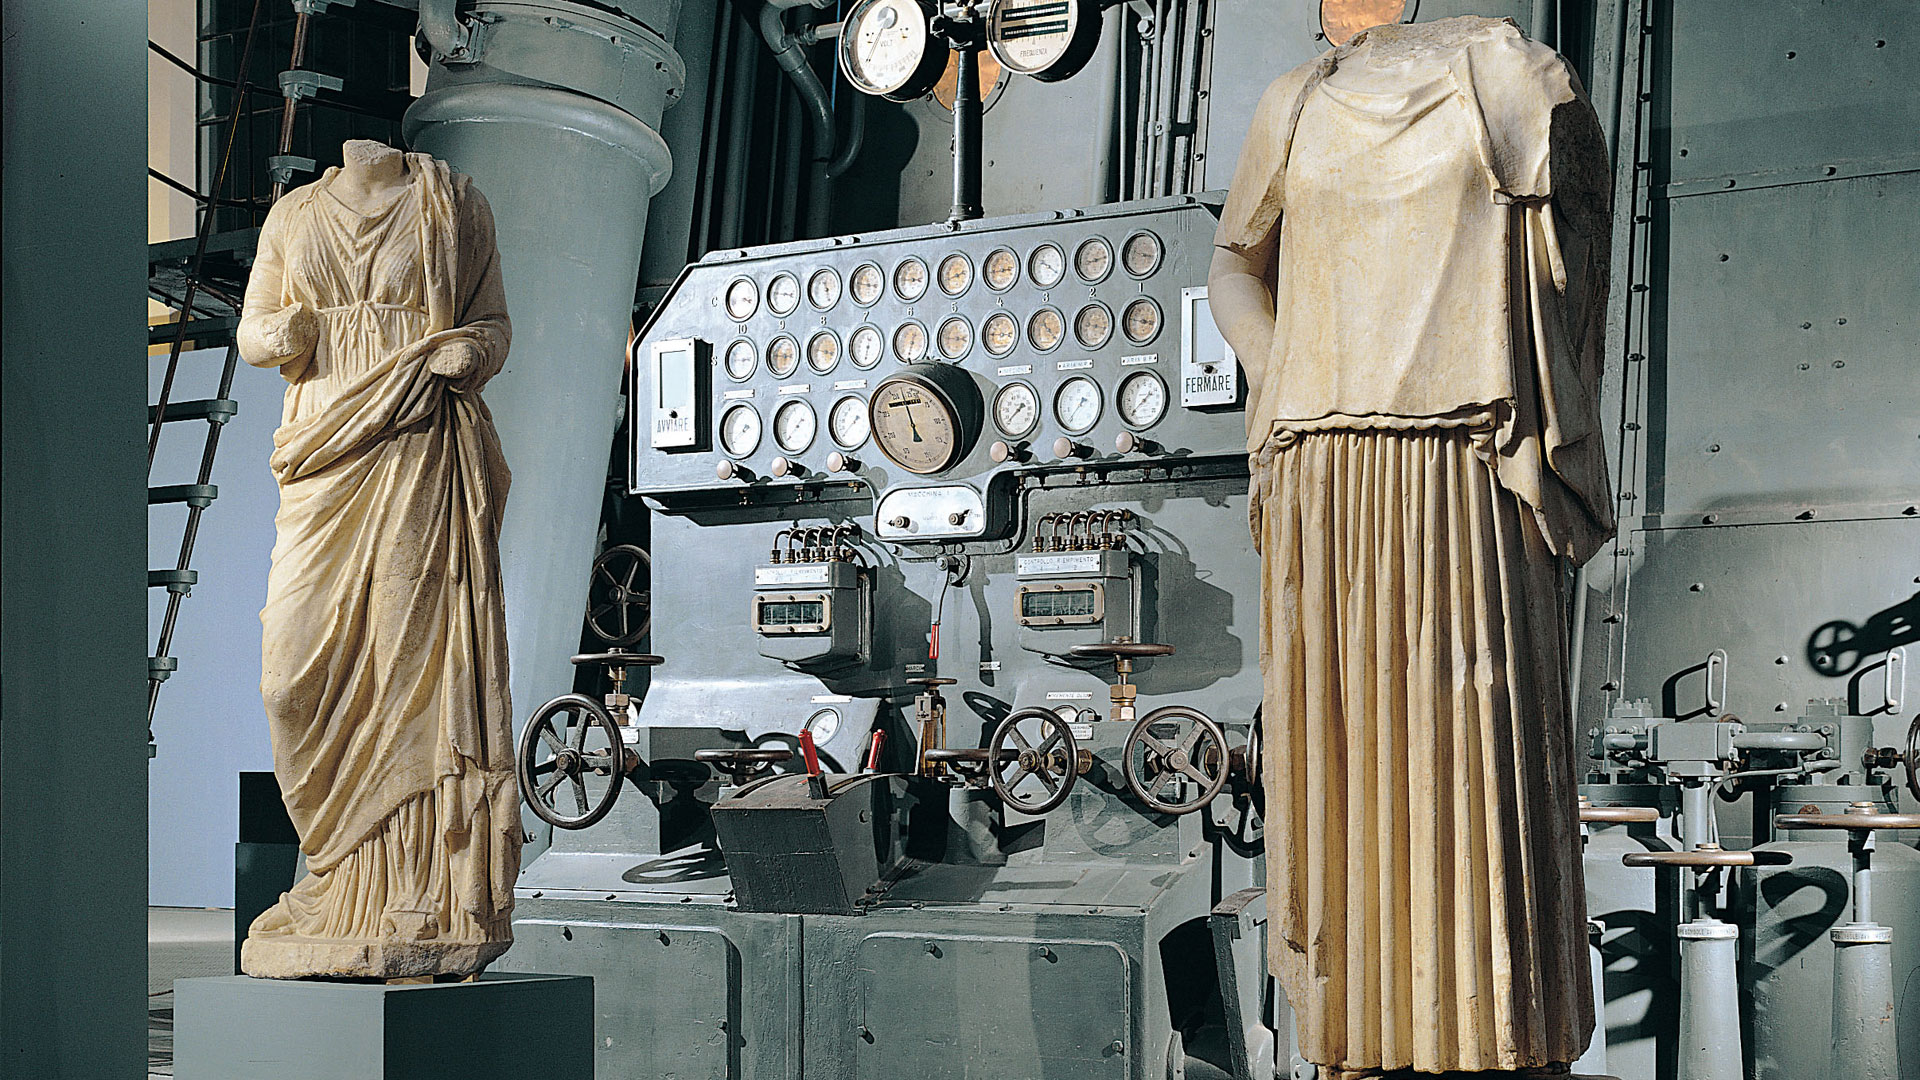 Centrale Montemartini, Statues among Machines
Best museums in Rome